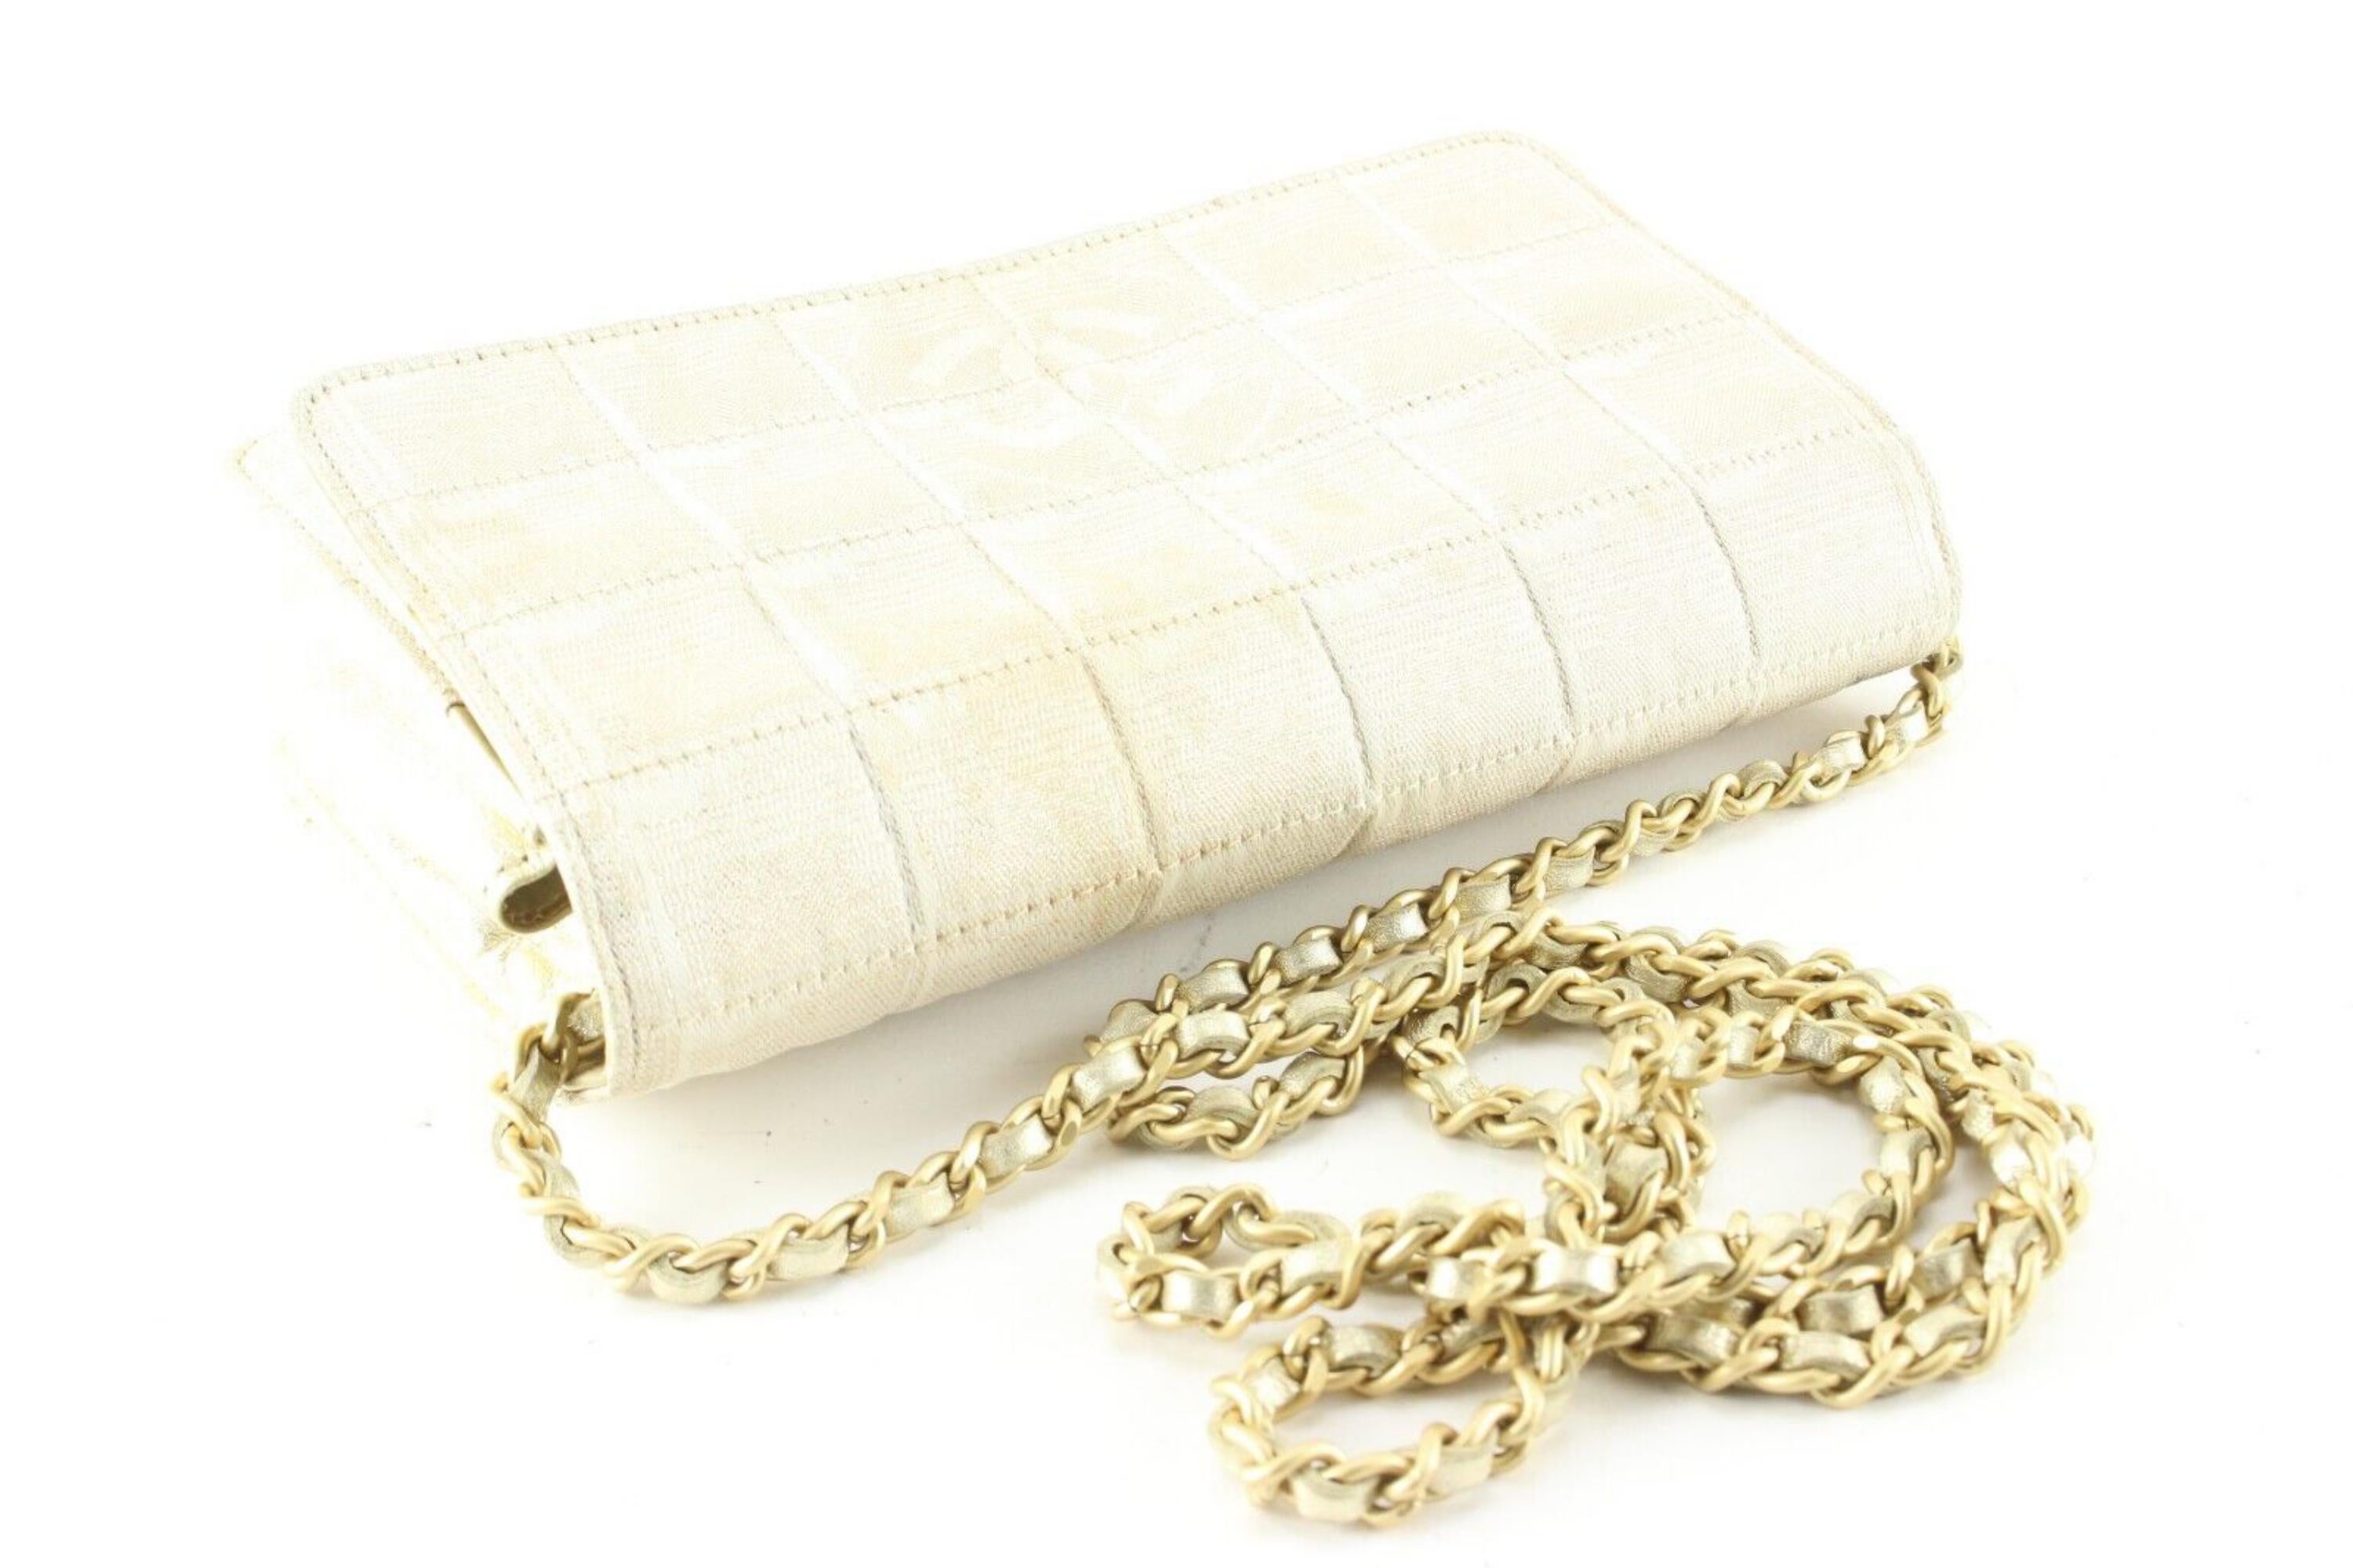 chanel iridescent wallet on chain